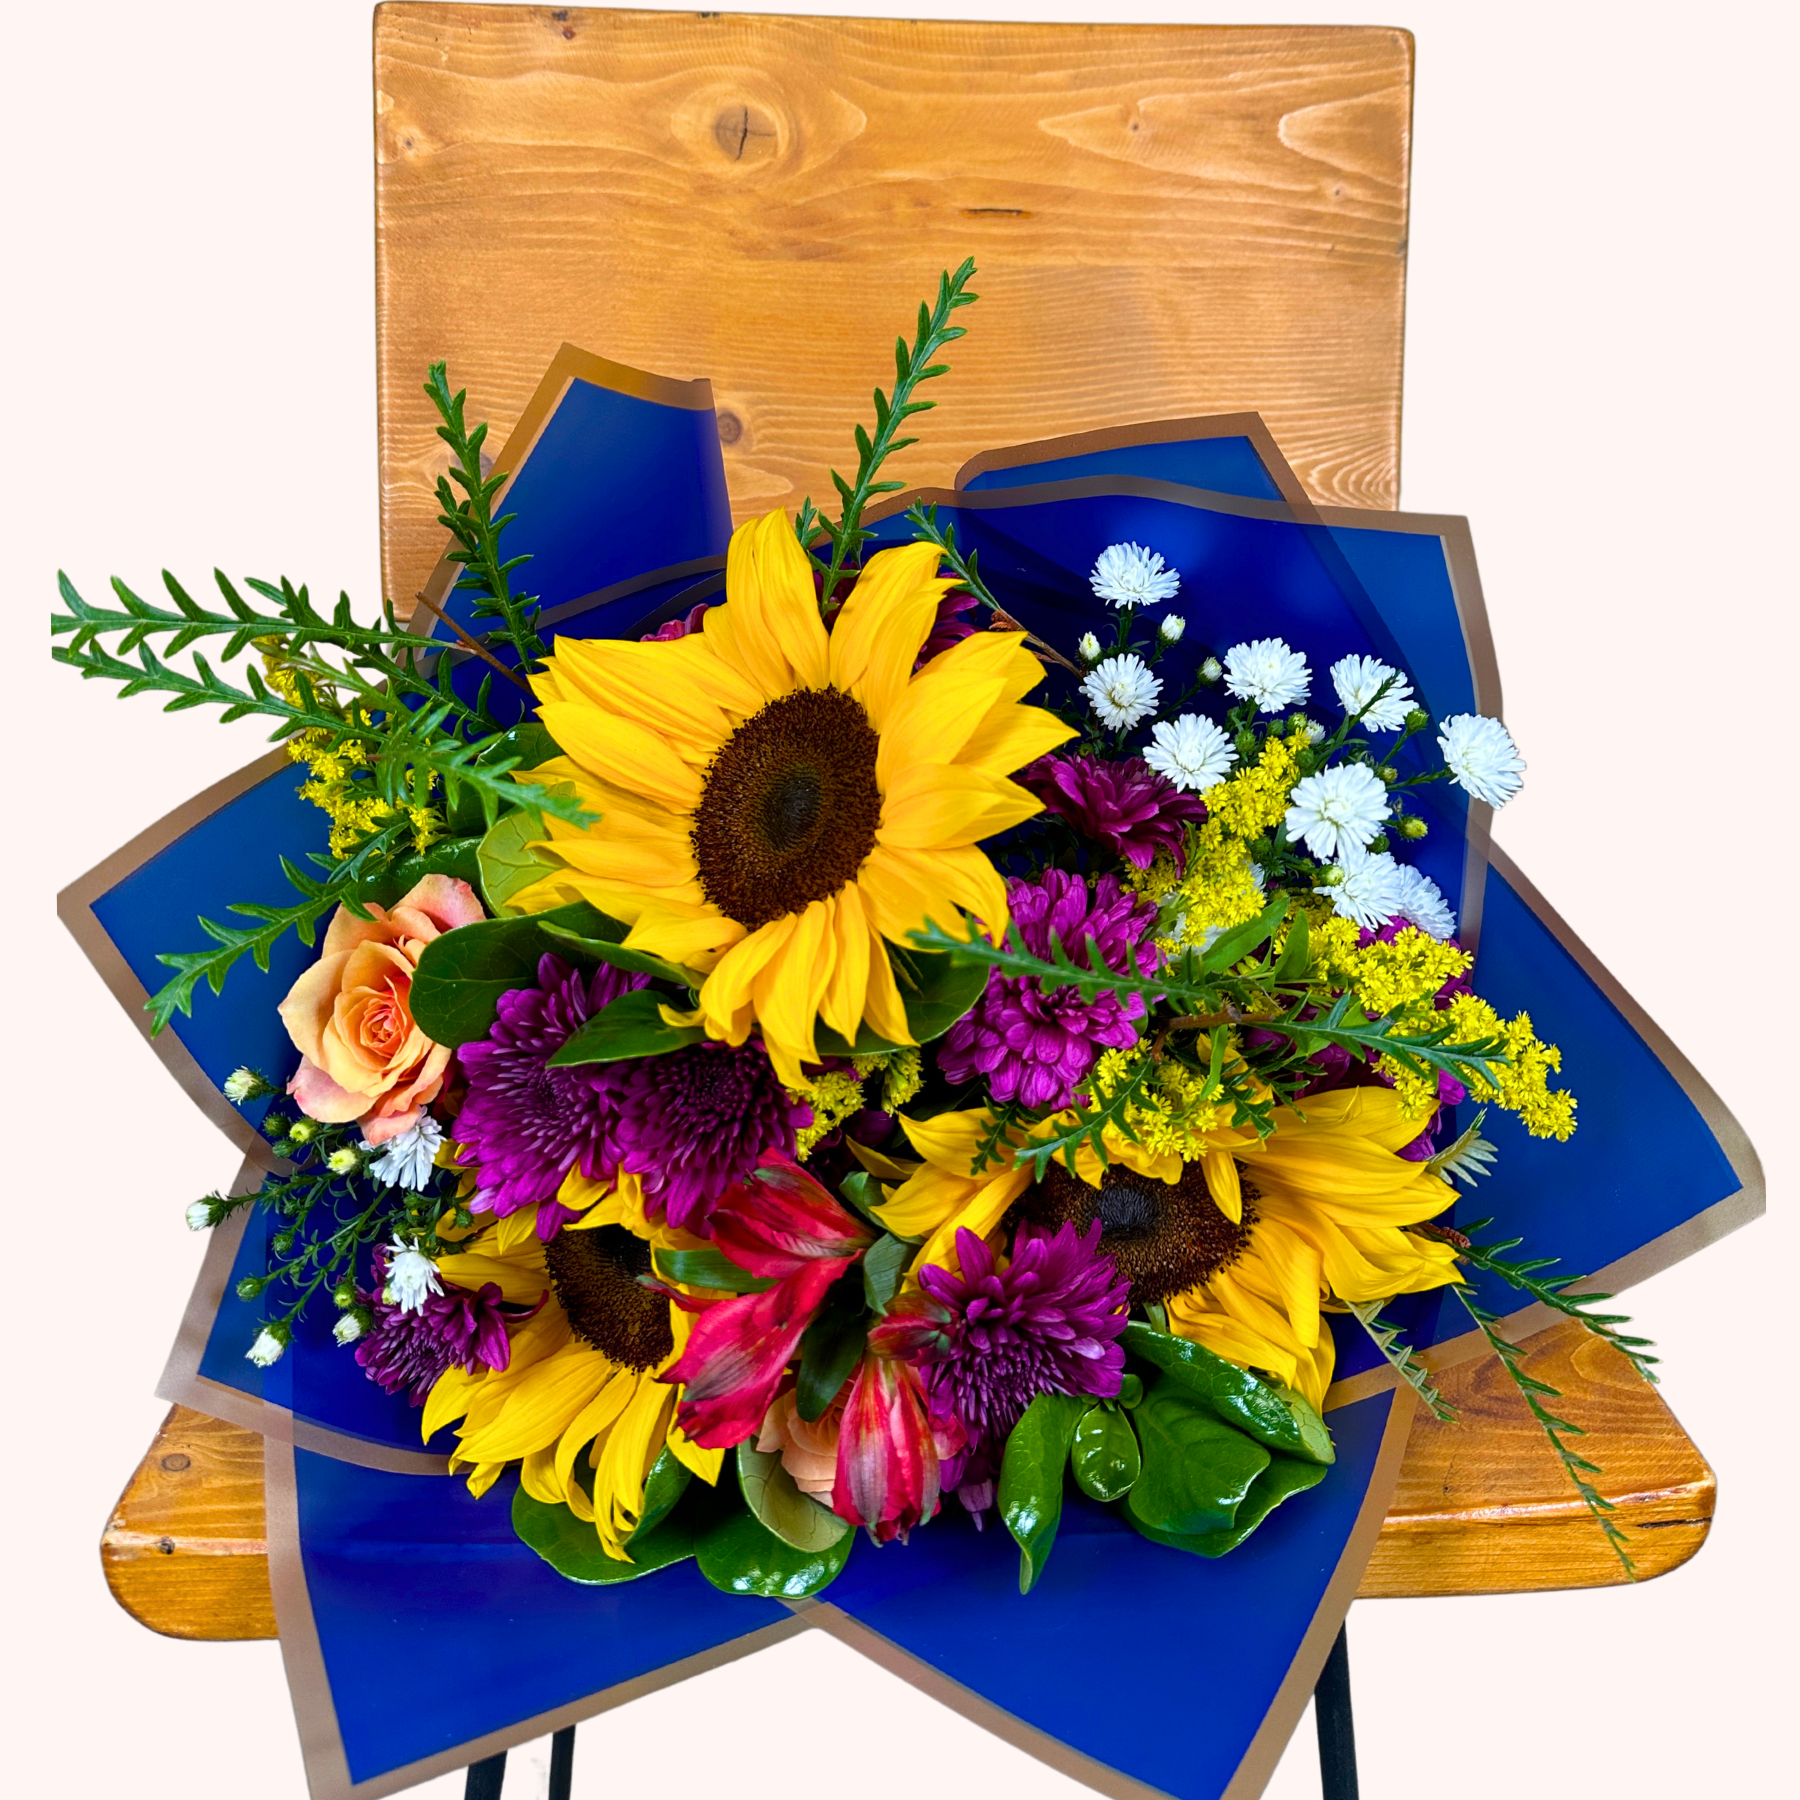 Blooming Sunshine Flower Bouquet with sunflowers, purple chrysanthemums, pink alstroemerias, orange roses, and white daisies, displayed on a wooden chair - Fabulous Flowers and Gifts